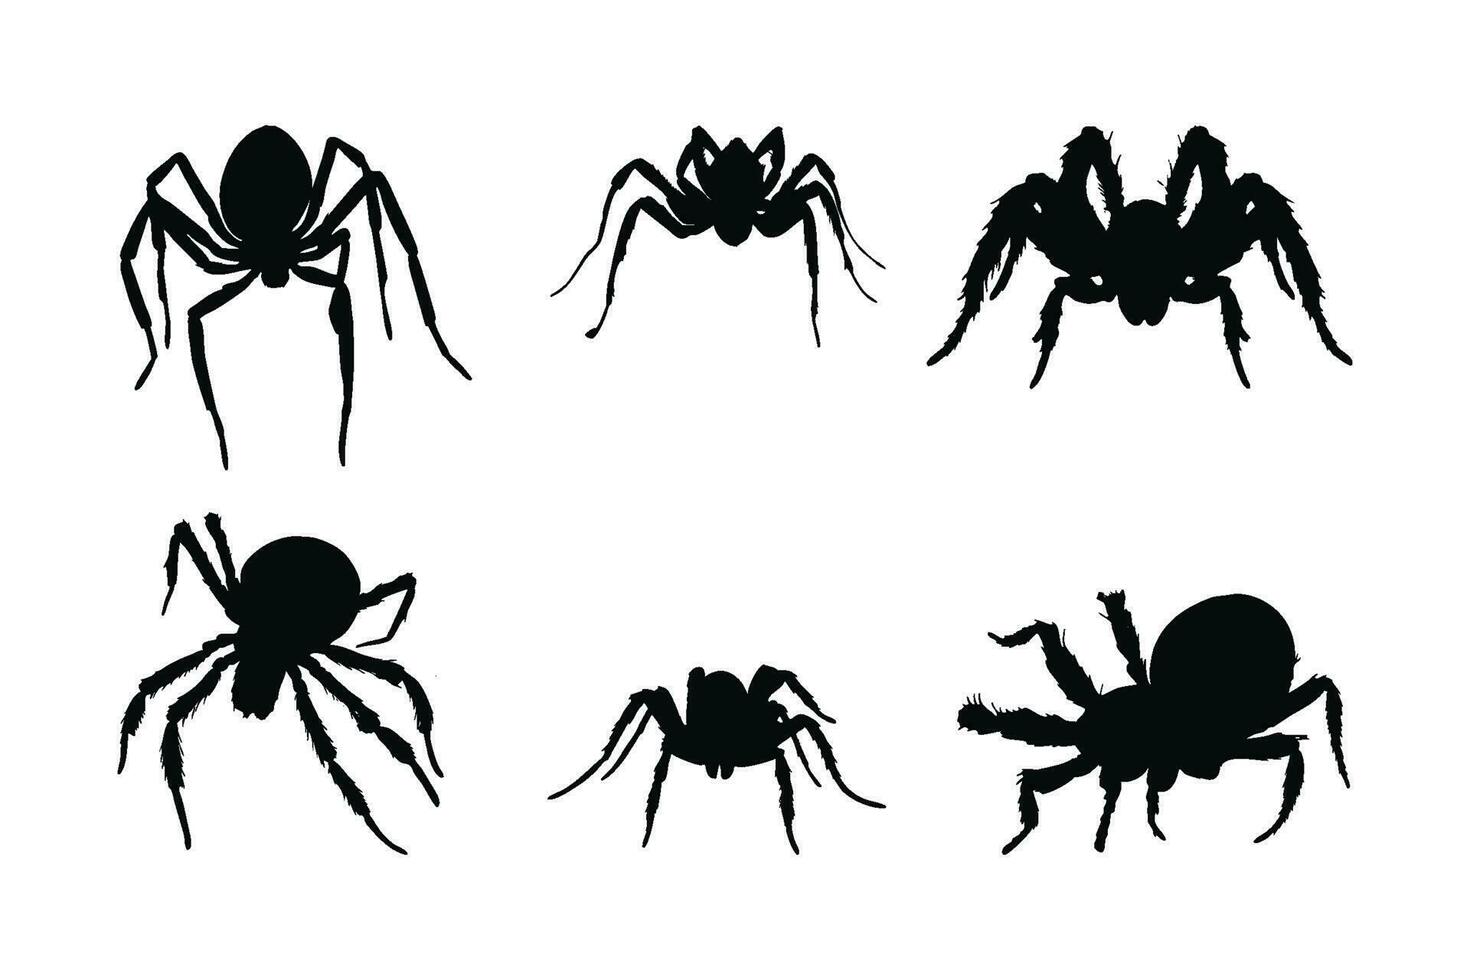 Dangerous tarantula spiders silhouette bundle. Wild insects sitting in different positions. Spider full body silhouette collection. Furry spiders and insects sitting, silhouettes on a white background vector